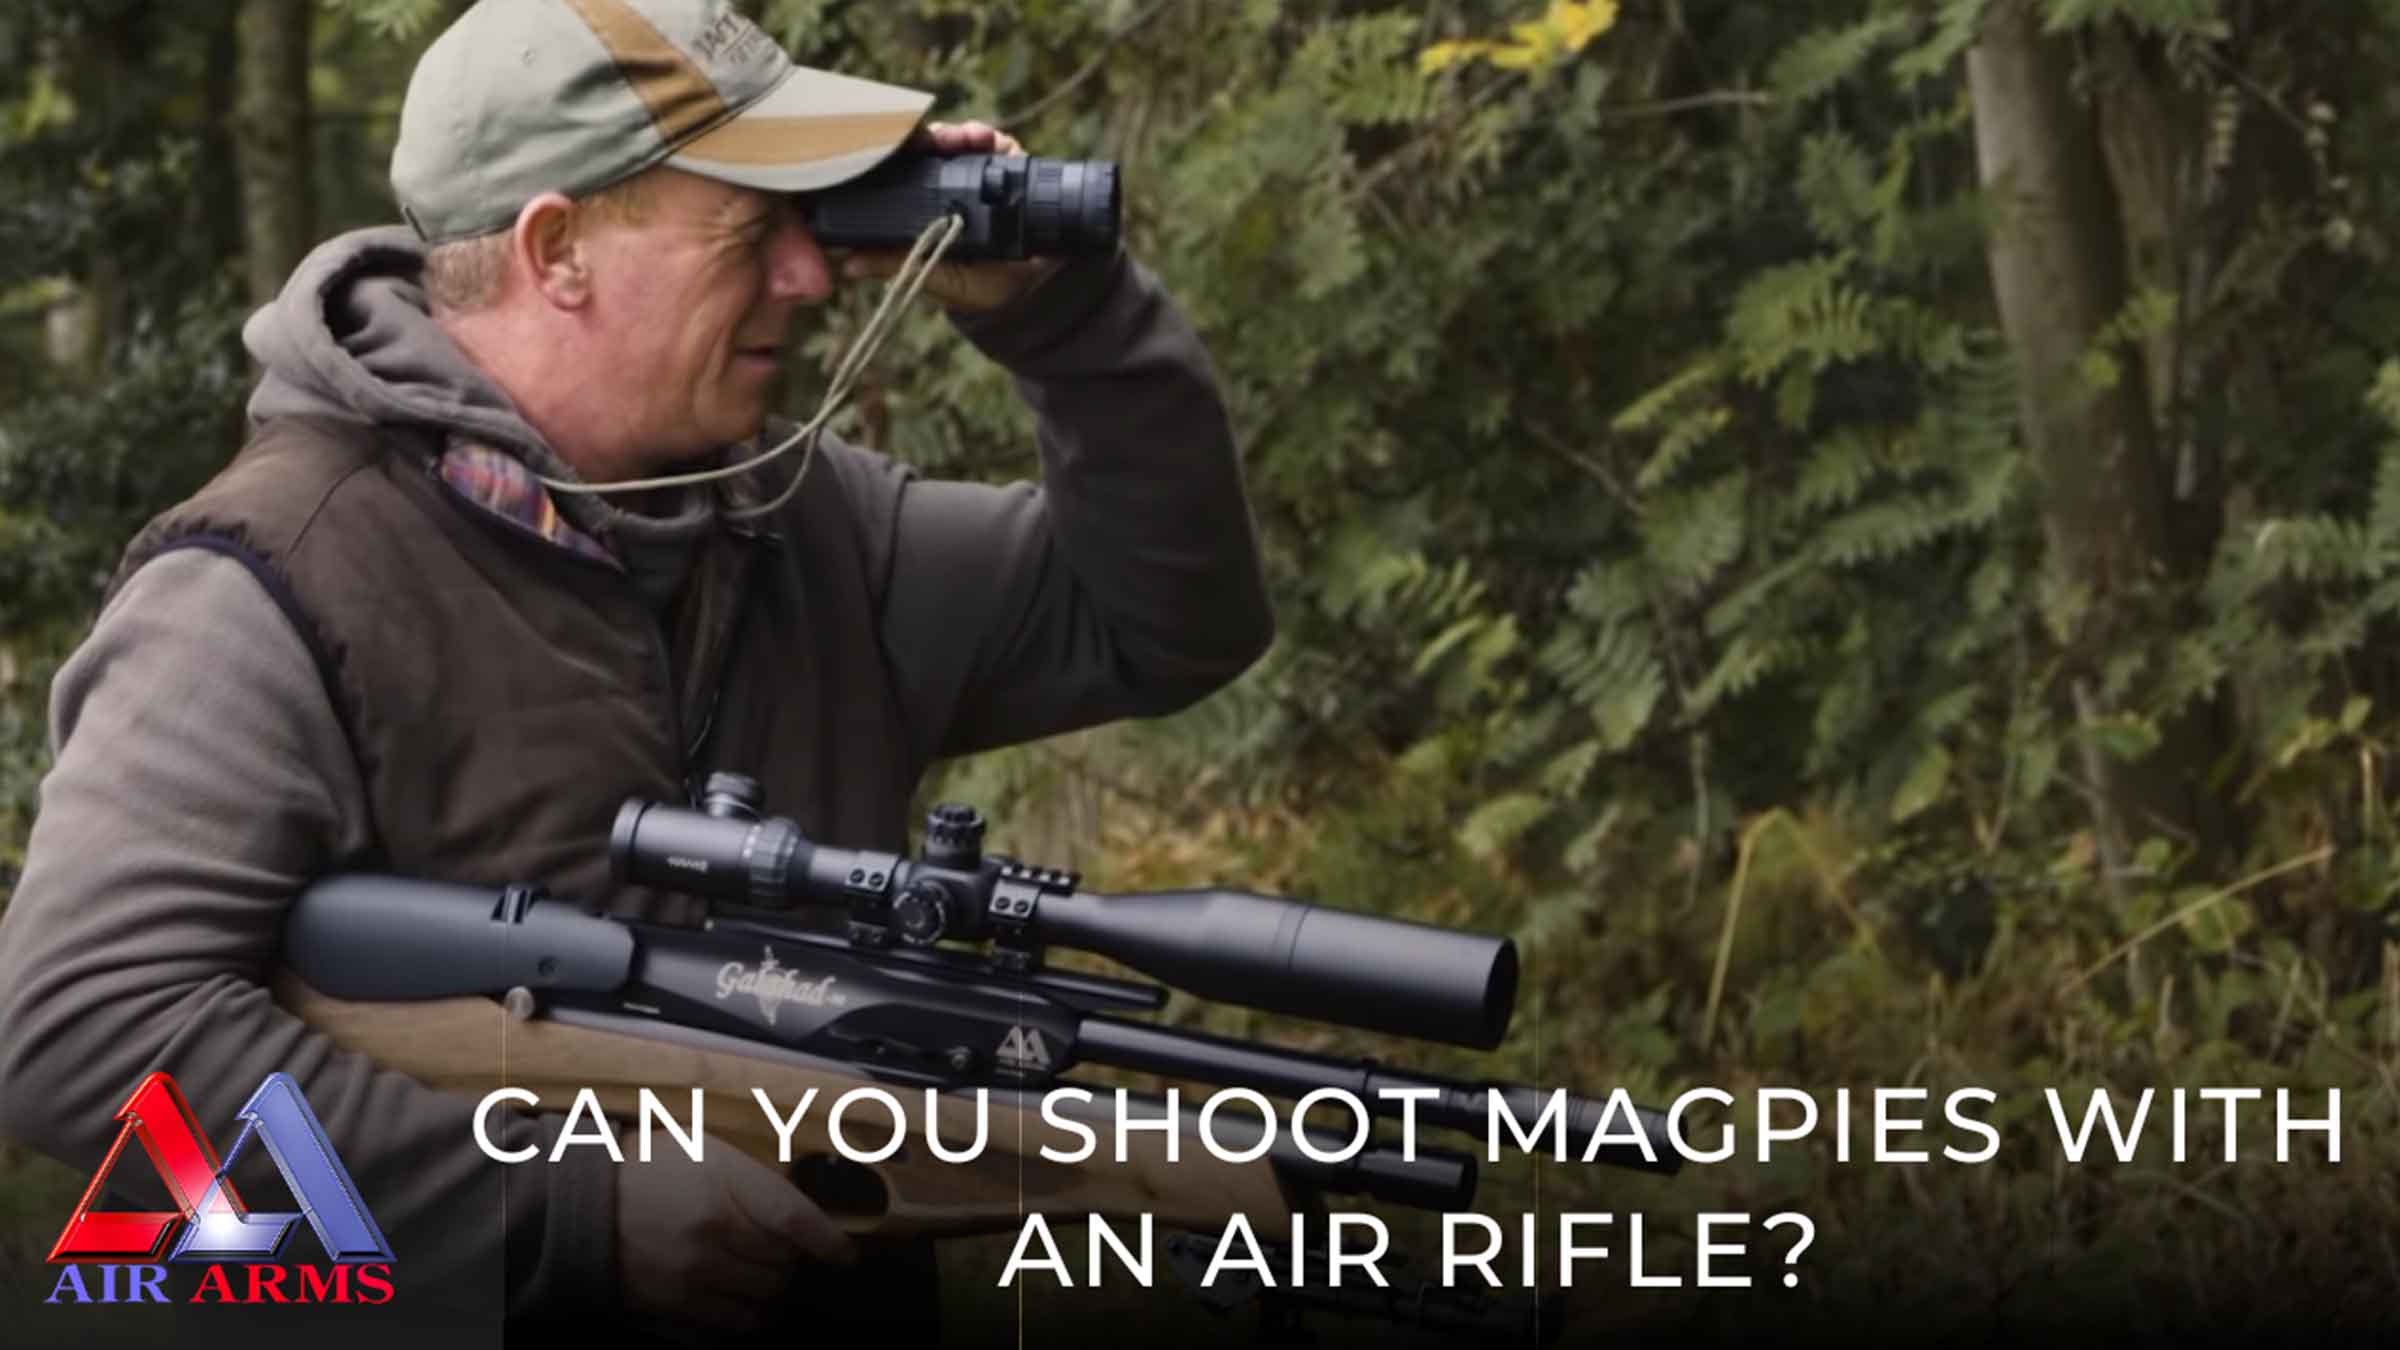 Can you shoot magpies with an air rifle?